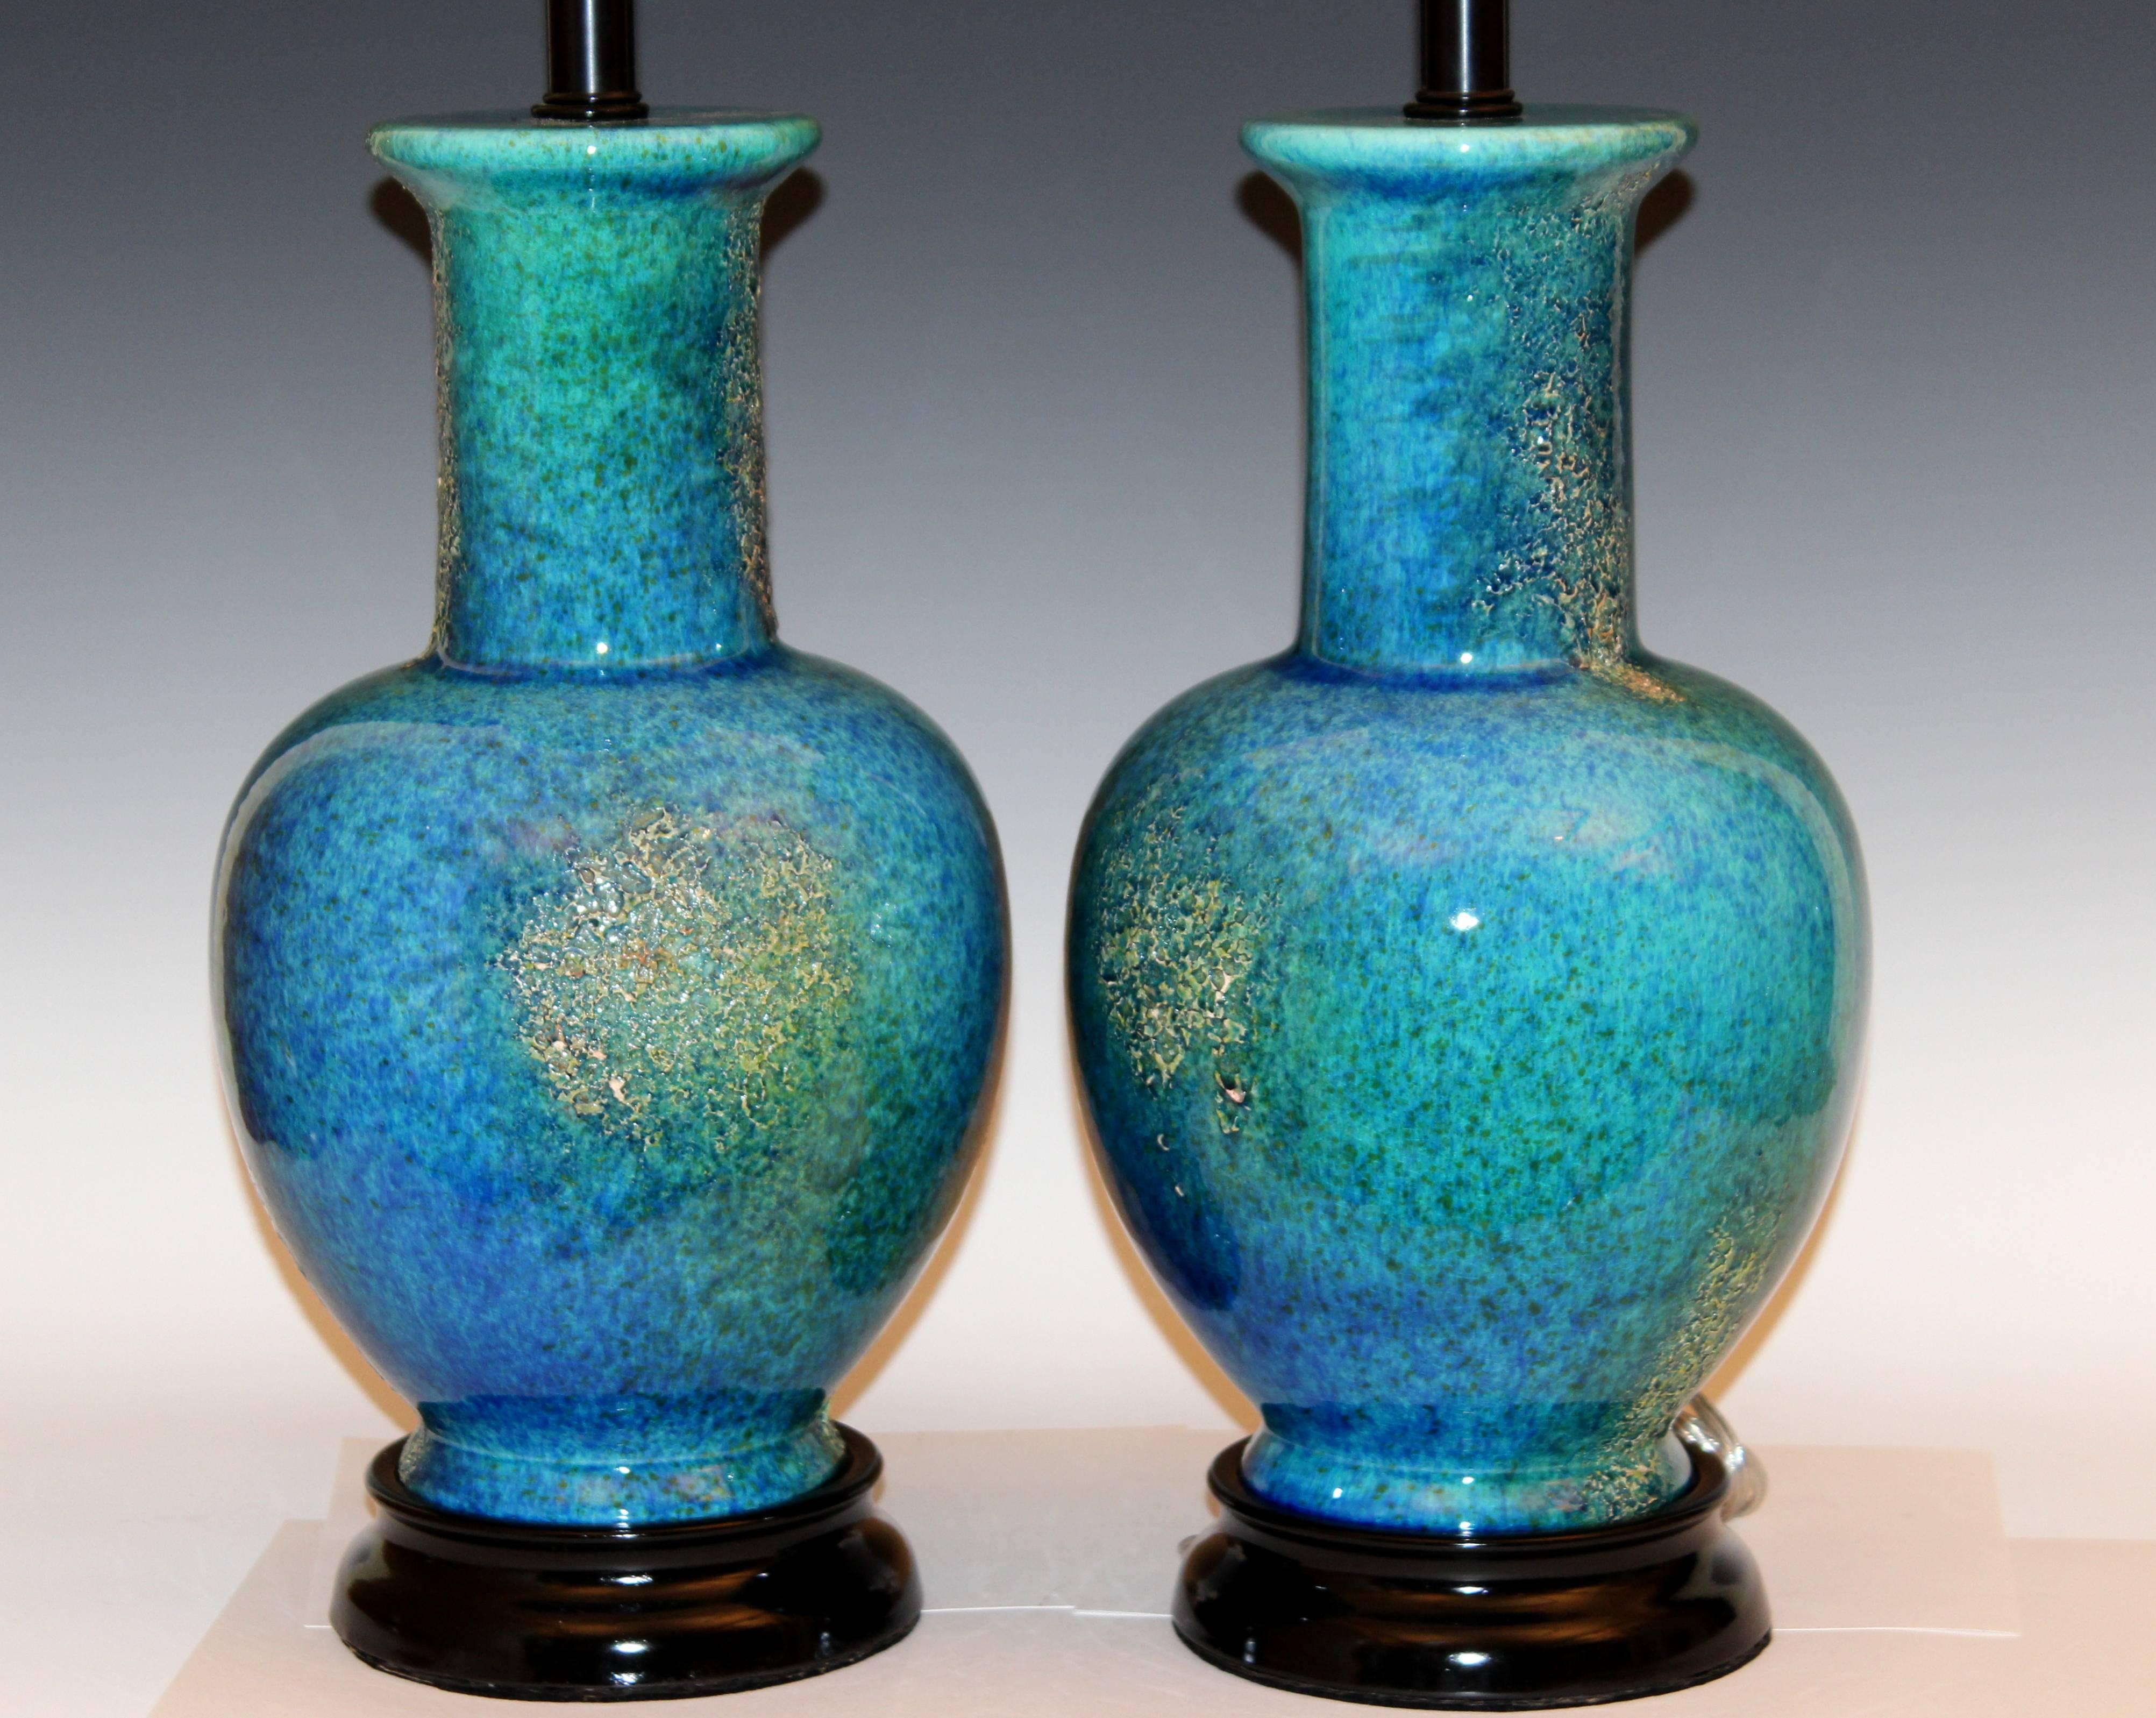 Large pair of vintage Haeger pottery lamps in mottled turquoise lava glaze designed by Helmut Bruchman, circa 1960's. New wiring and sockets with 3-way switches, reconditioned hardware. 31